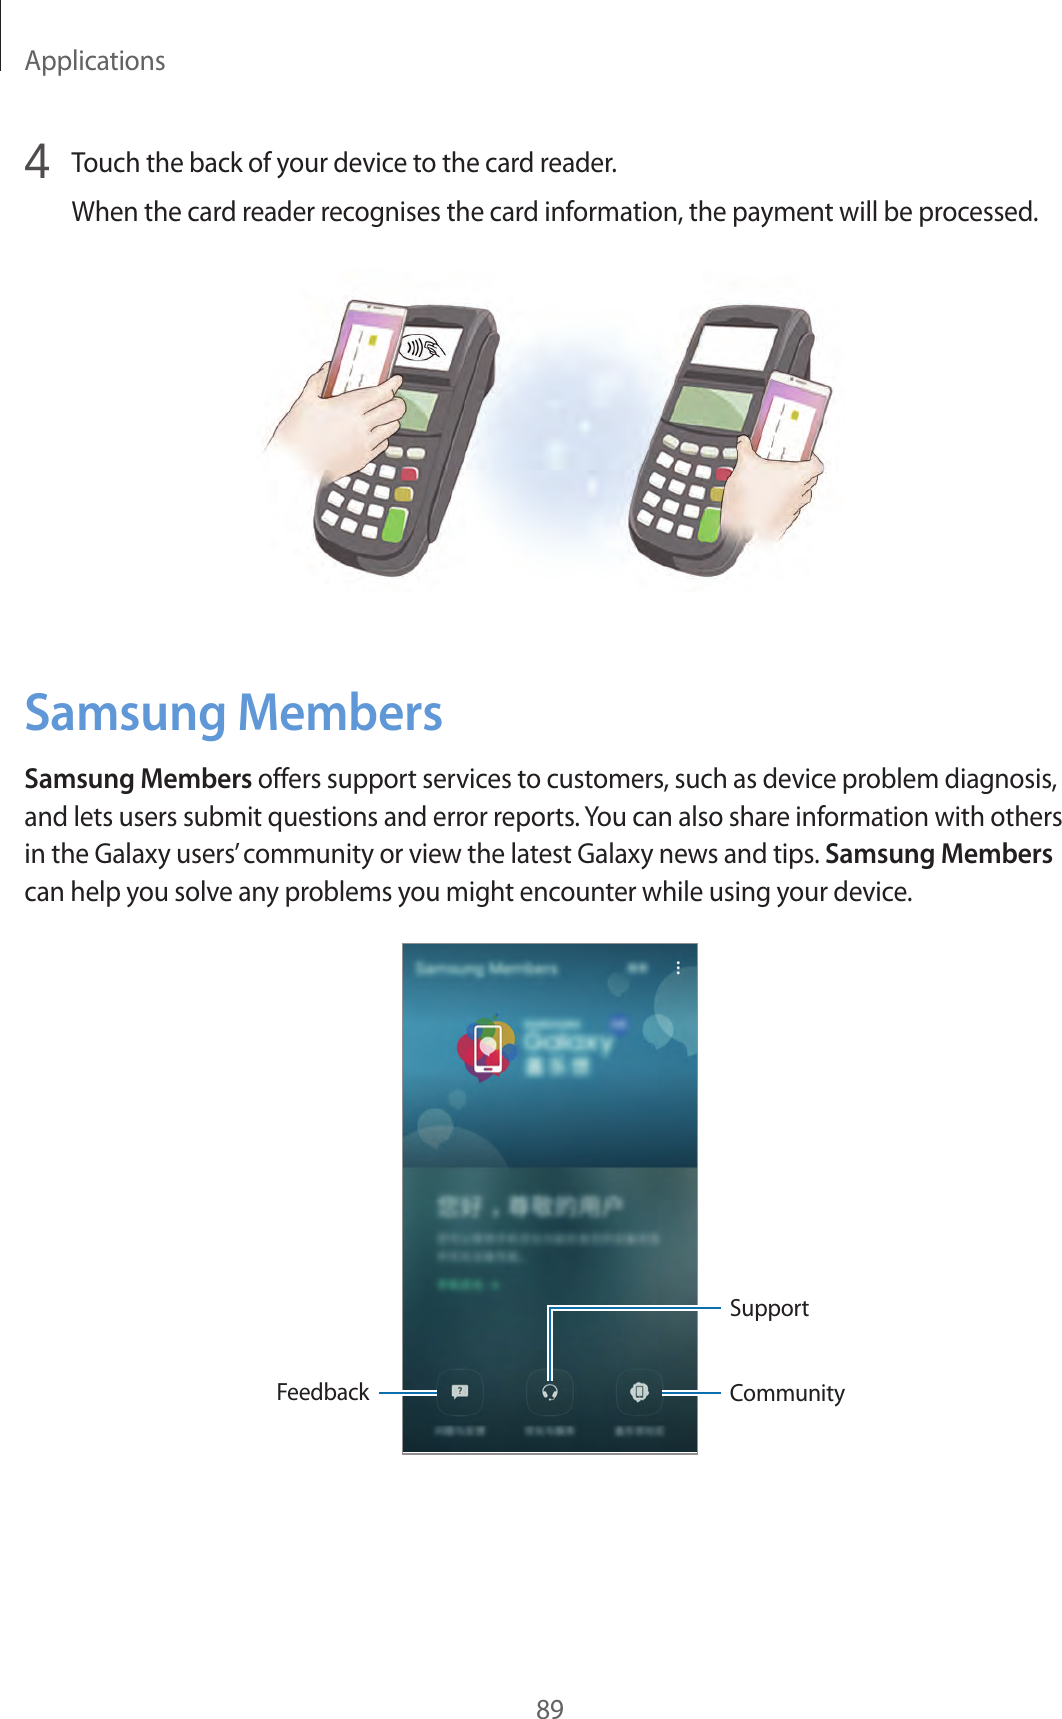 Applications894  Touch the back of your device to the card reader.When the card reader recognises the card information, the payment will be processed.Samsung MembersSamsung Members offers support services to customers, such as device problem diagnosis, and lets users submit questions and error reports. You can also share information with others in the Galaxy users’ community or view the latest Galaxy news and tips. Samsung Members can help you solve any problems you might encounter while using your device.FeedbackSupportCommunity